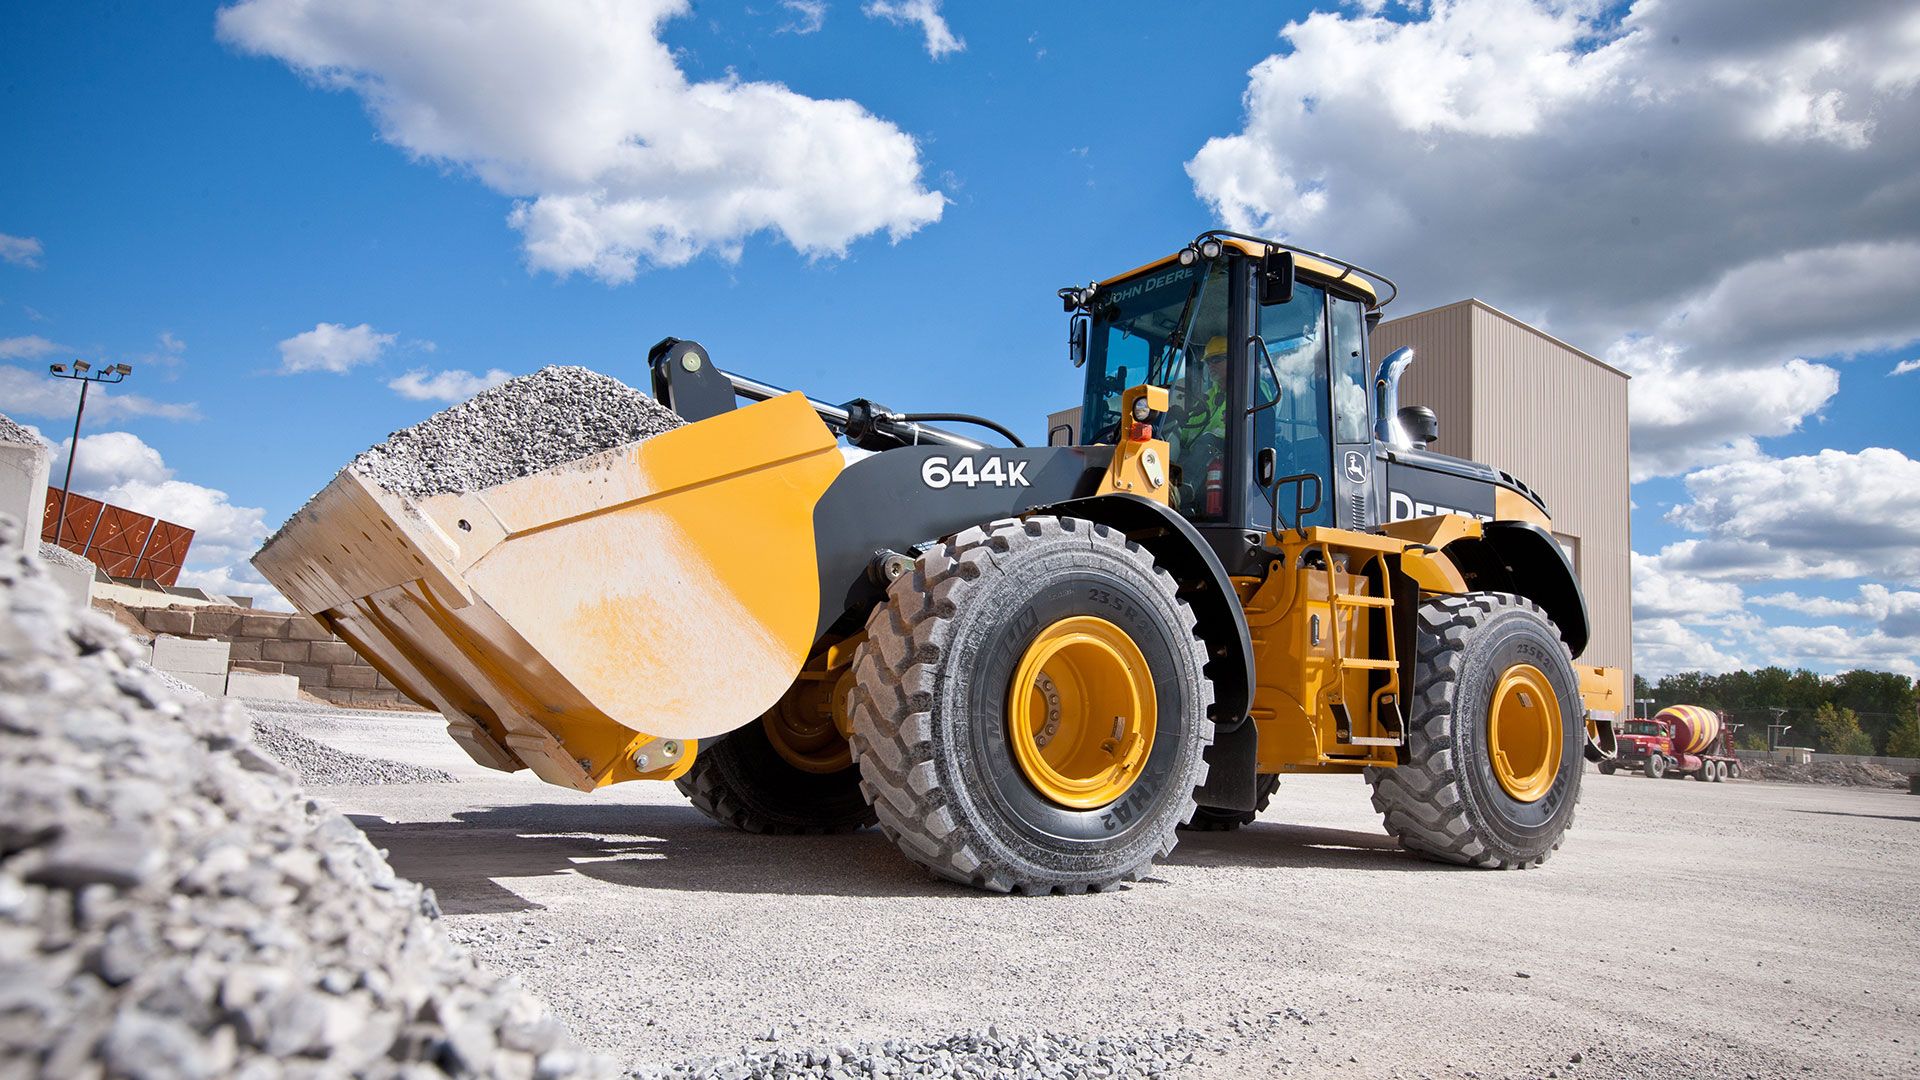 John Deere Construction Equipment Videos: See the Machines in Action